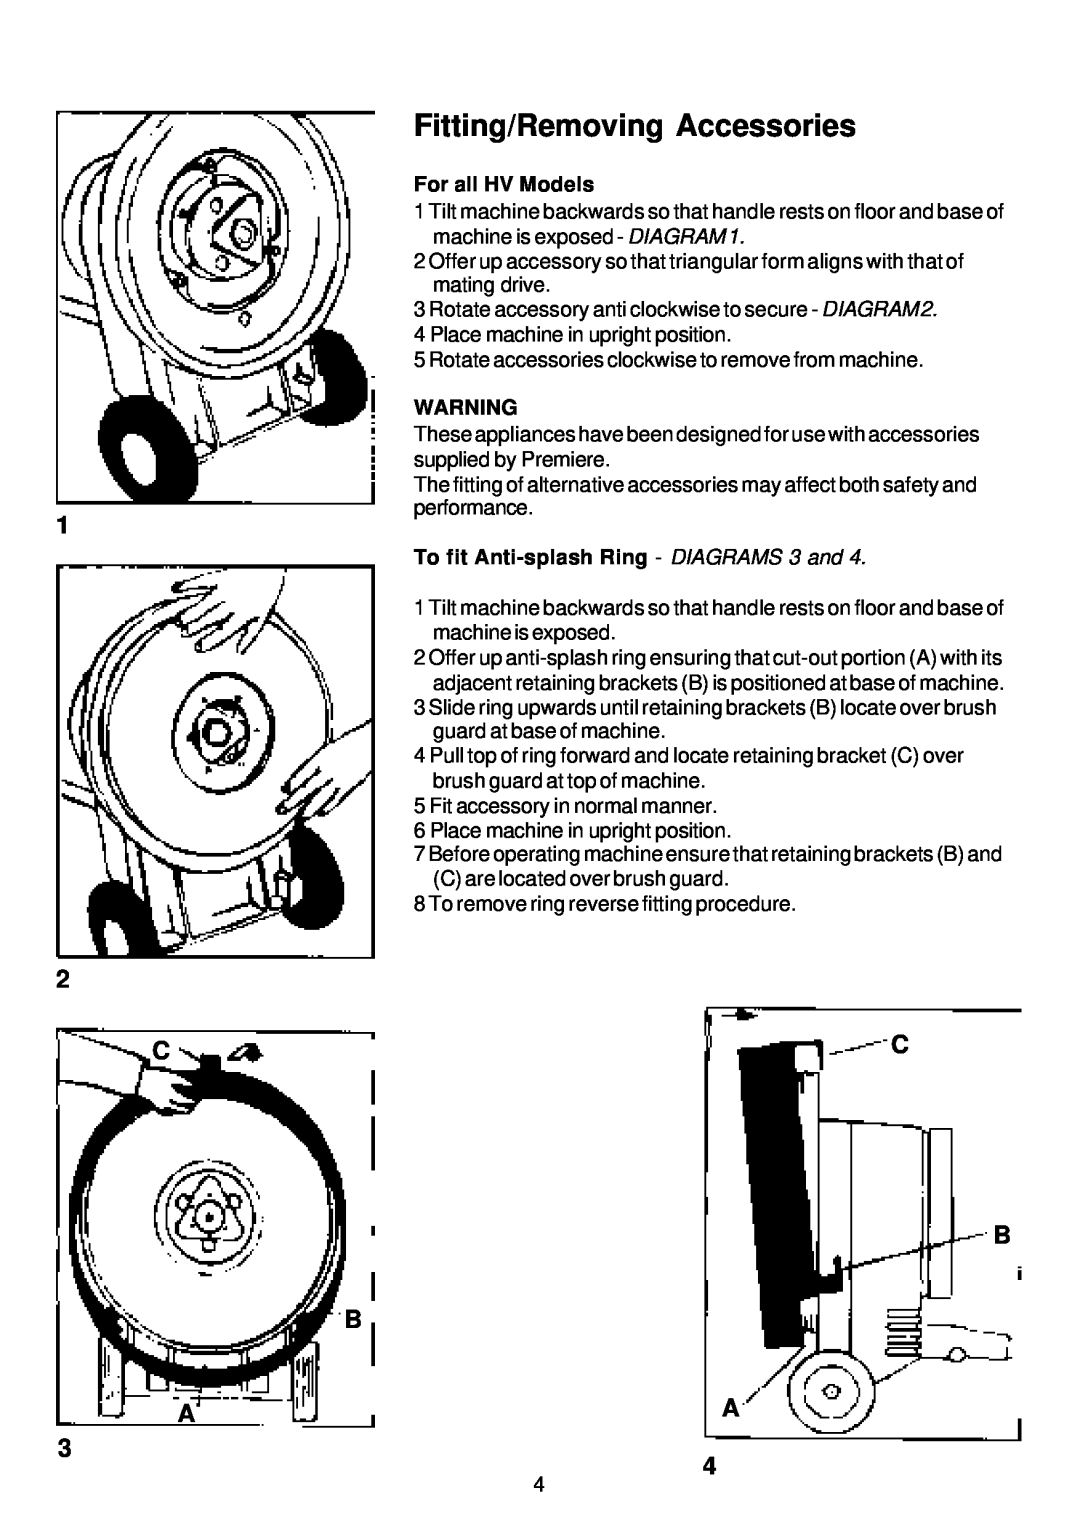 Premier HV 13, HV 17 Fitting/Removing Accessories, Cc B B Aa, For all HV Models, To fit Anti-splash Ring - DIAGRAMS 3 and 